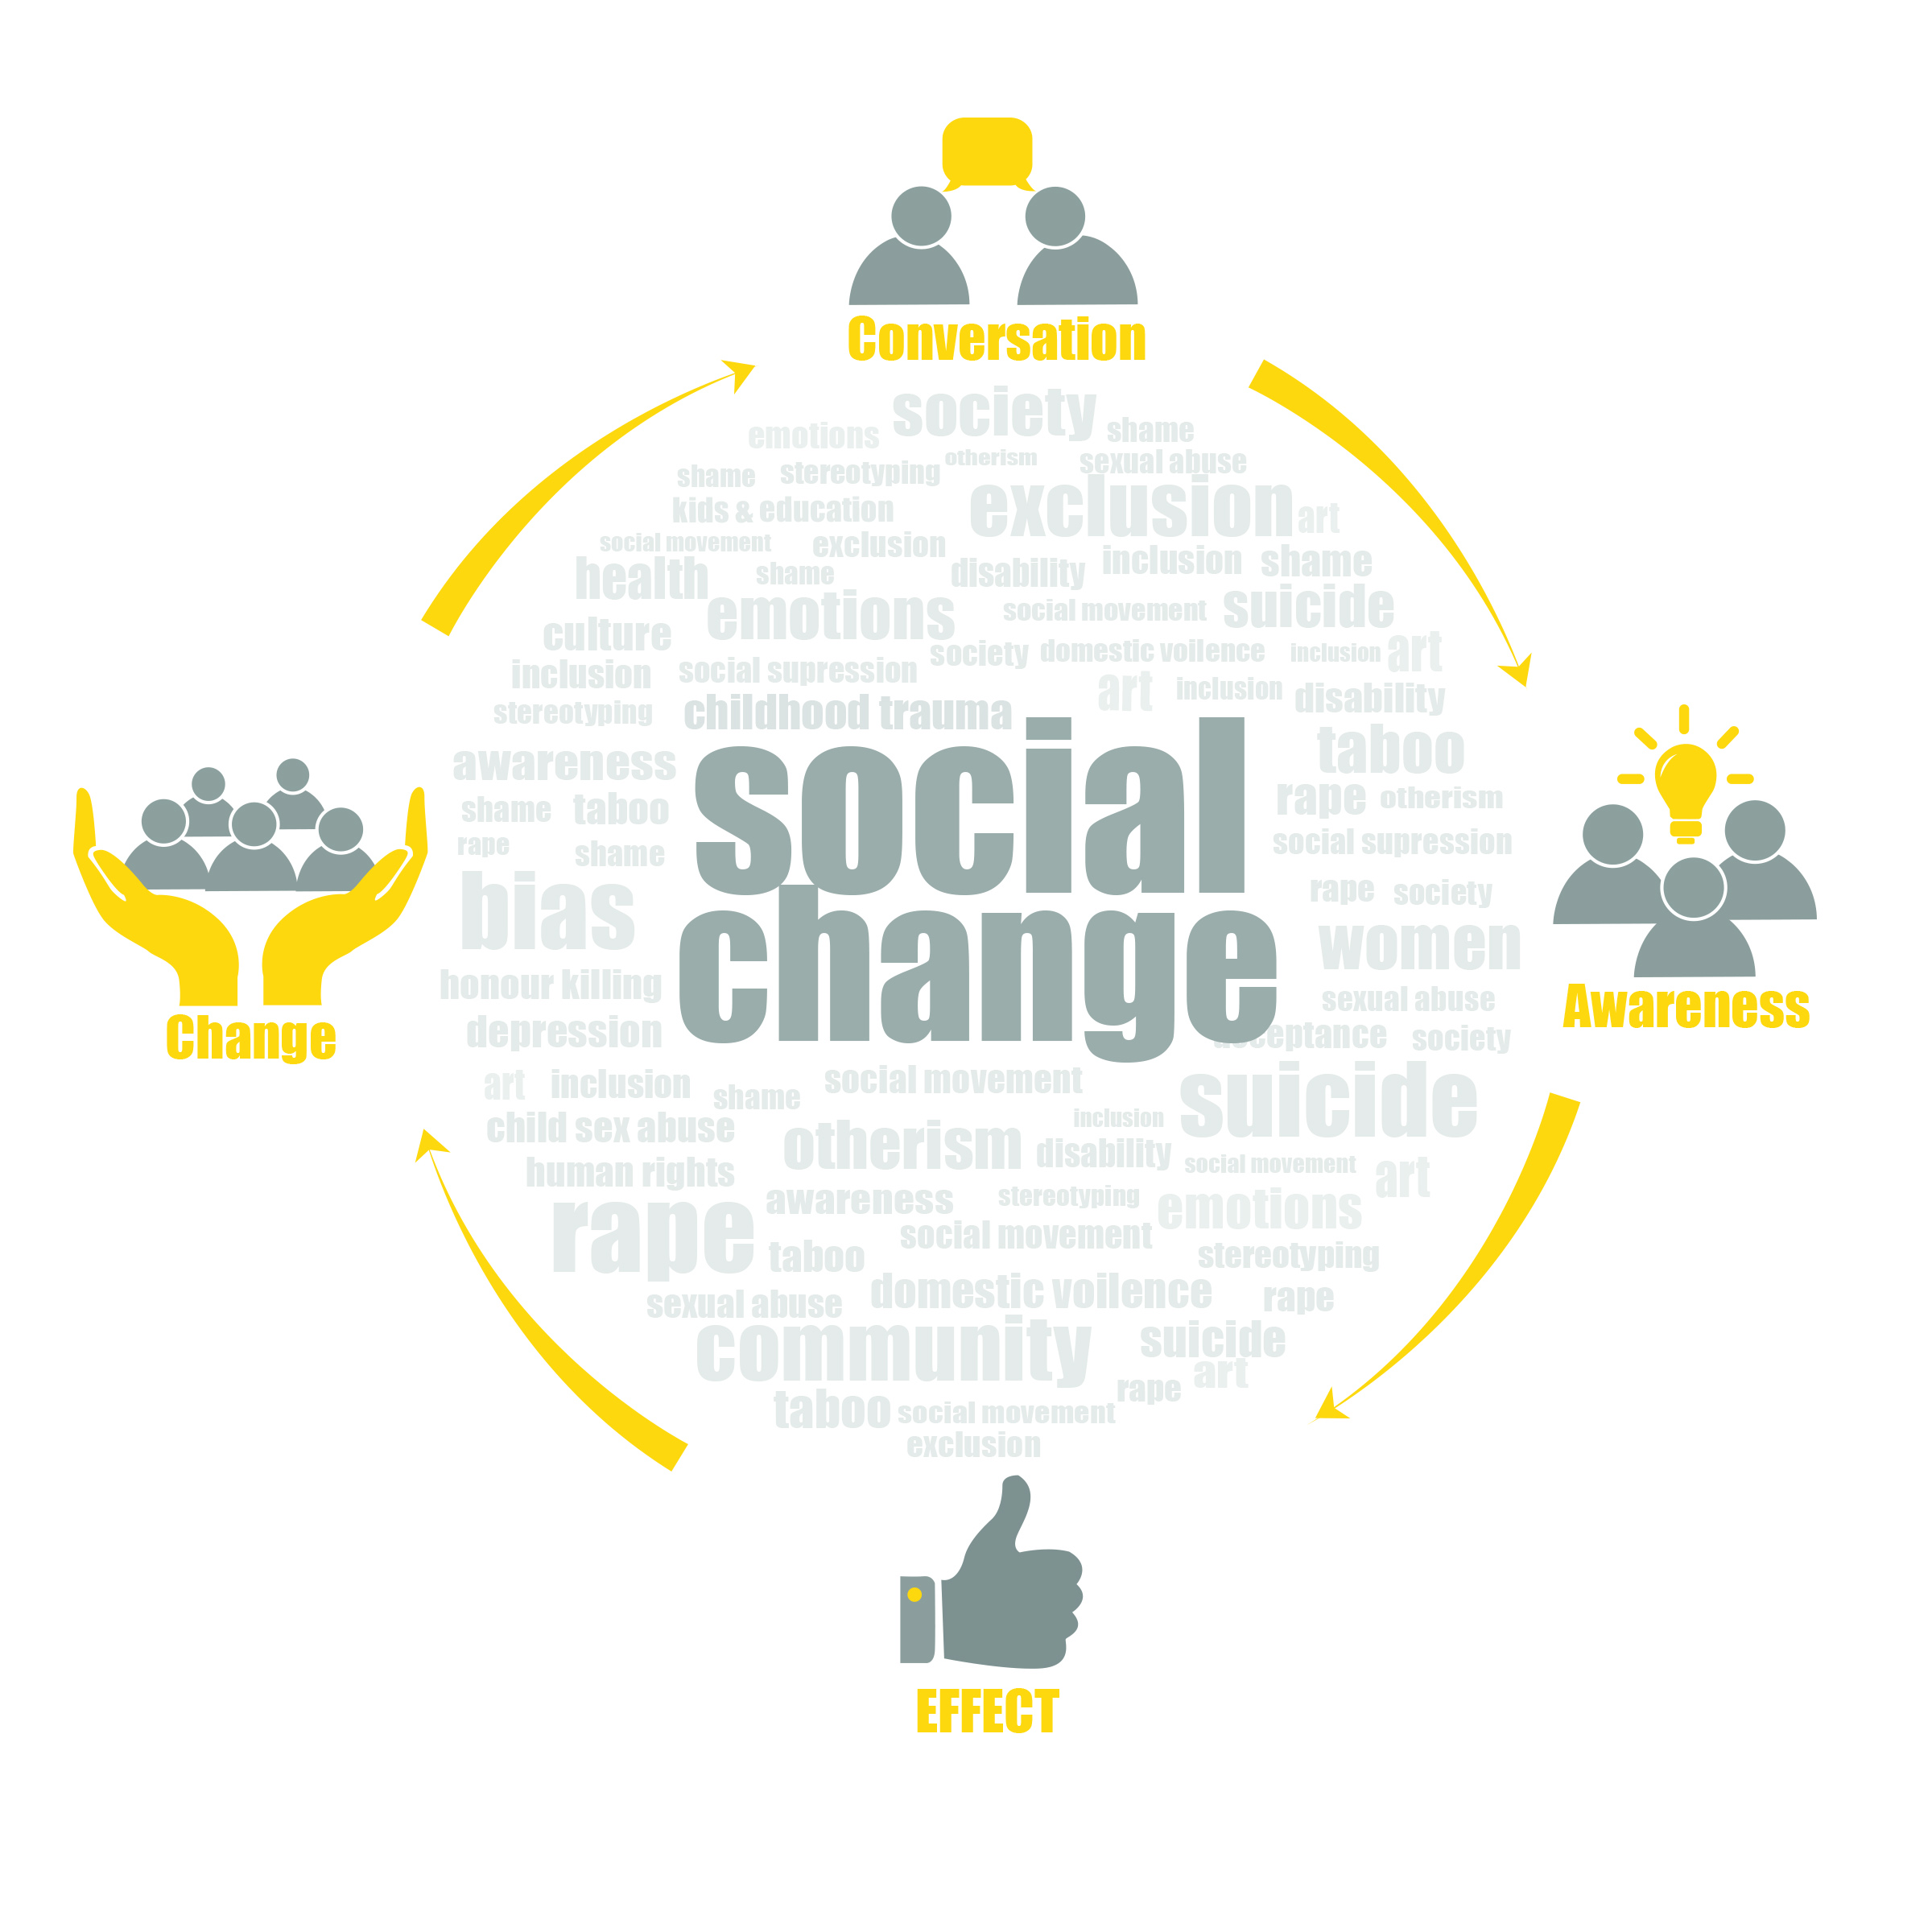 the process of social change